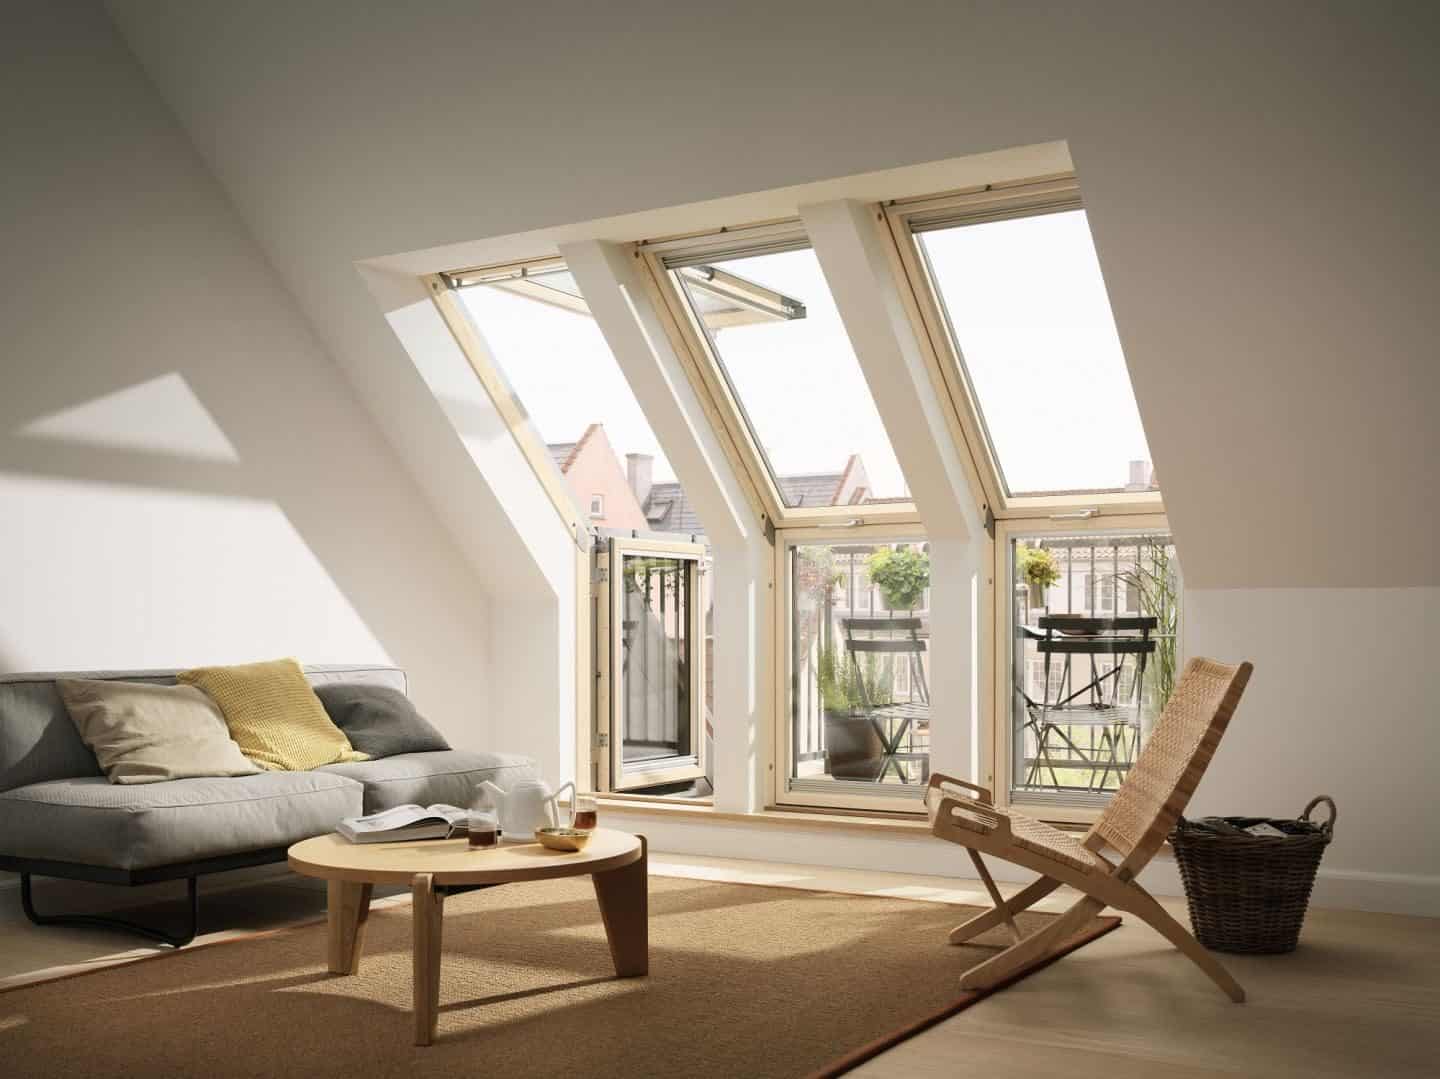 An attic living room - what about the windows?